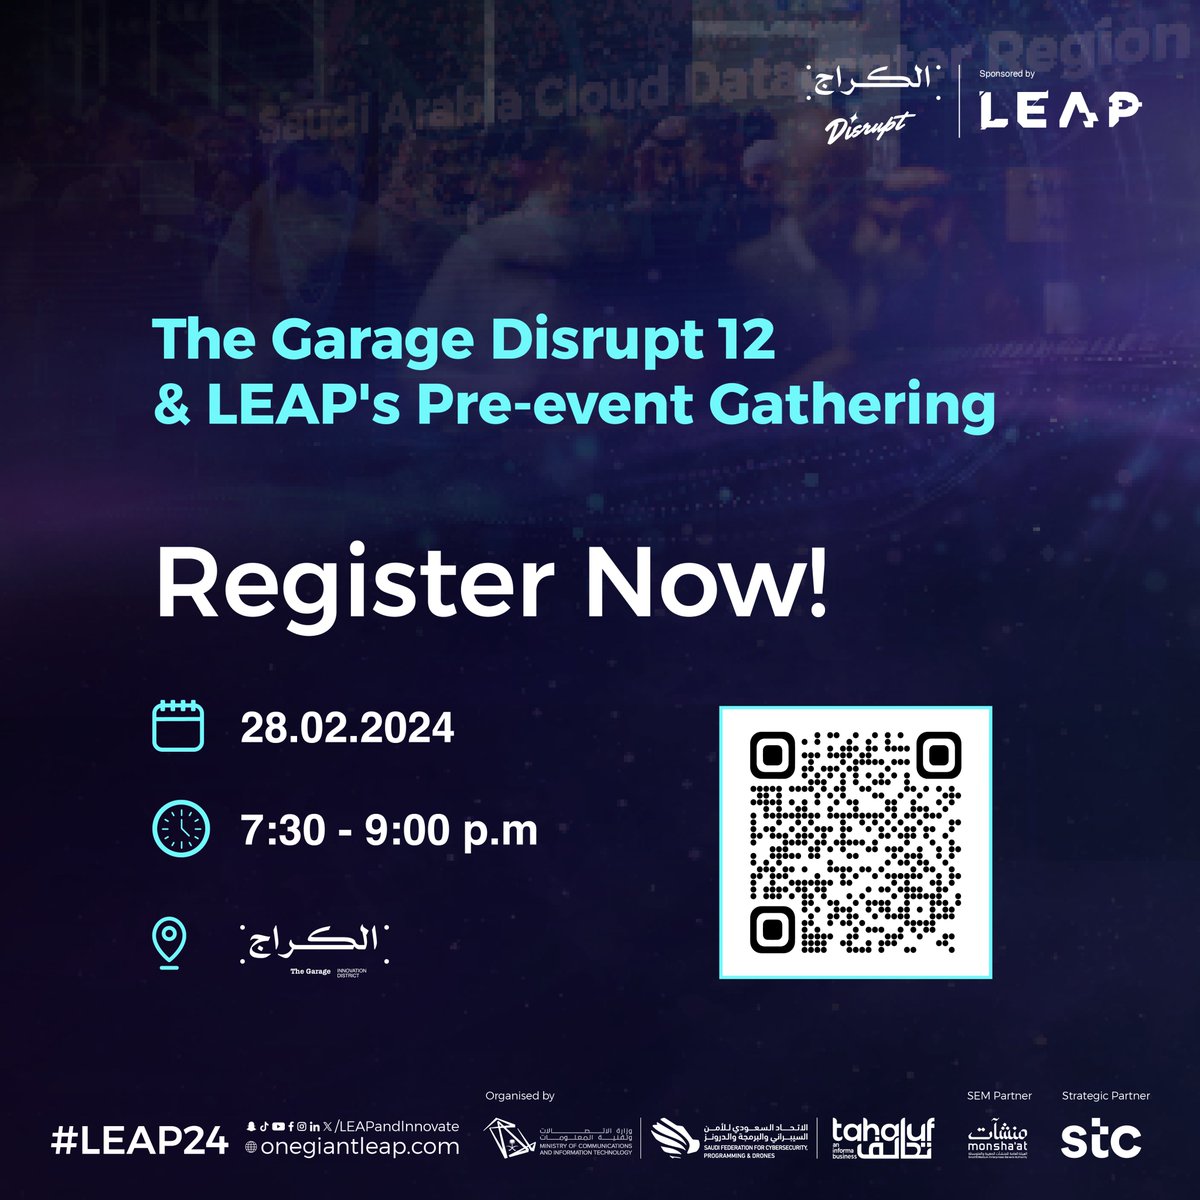 Don't miss out on #TheGarage X #LEAP24 Pre-event, and join us this Wednesday at 7:30 p.m. in The Garage tinyurl.com/DisrtupXLEAP